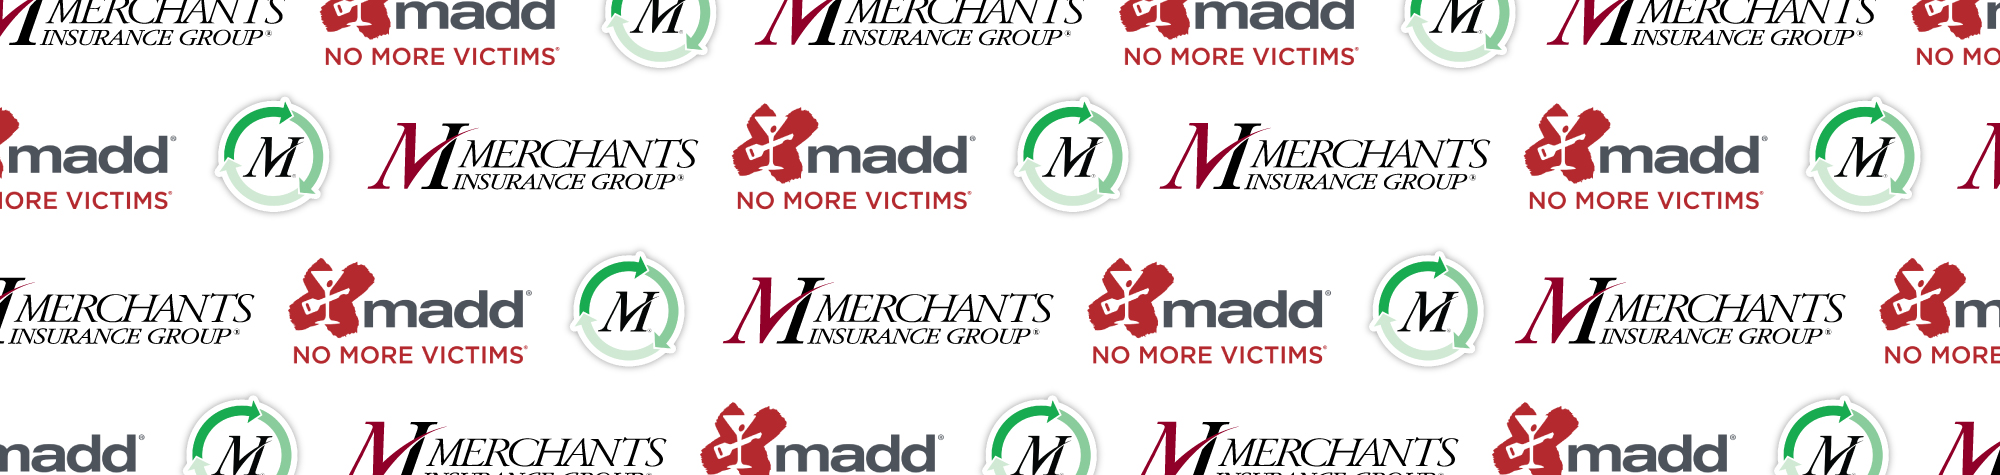 Merchants Insurance Group Encourages Paperless Billing and Policies with Donation to MADD®